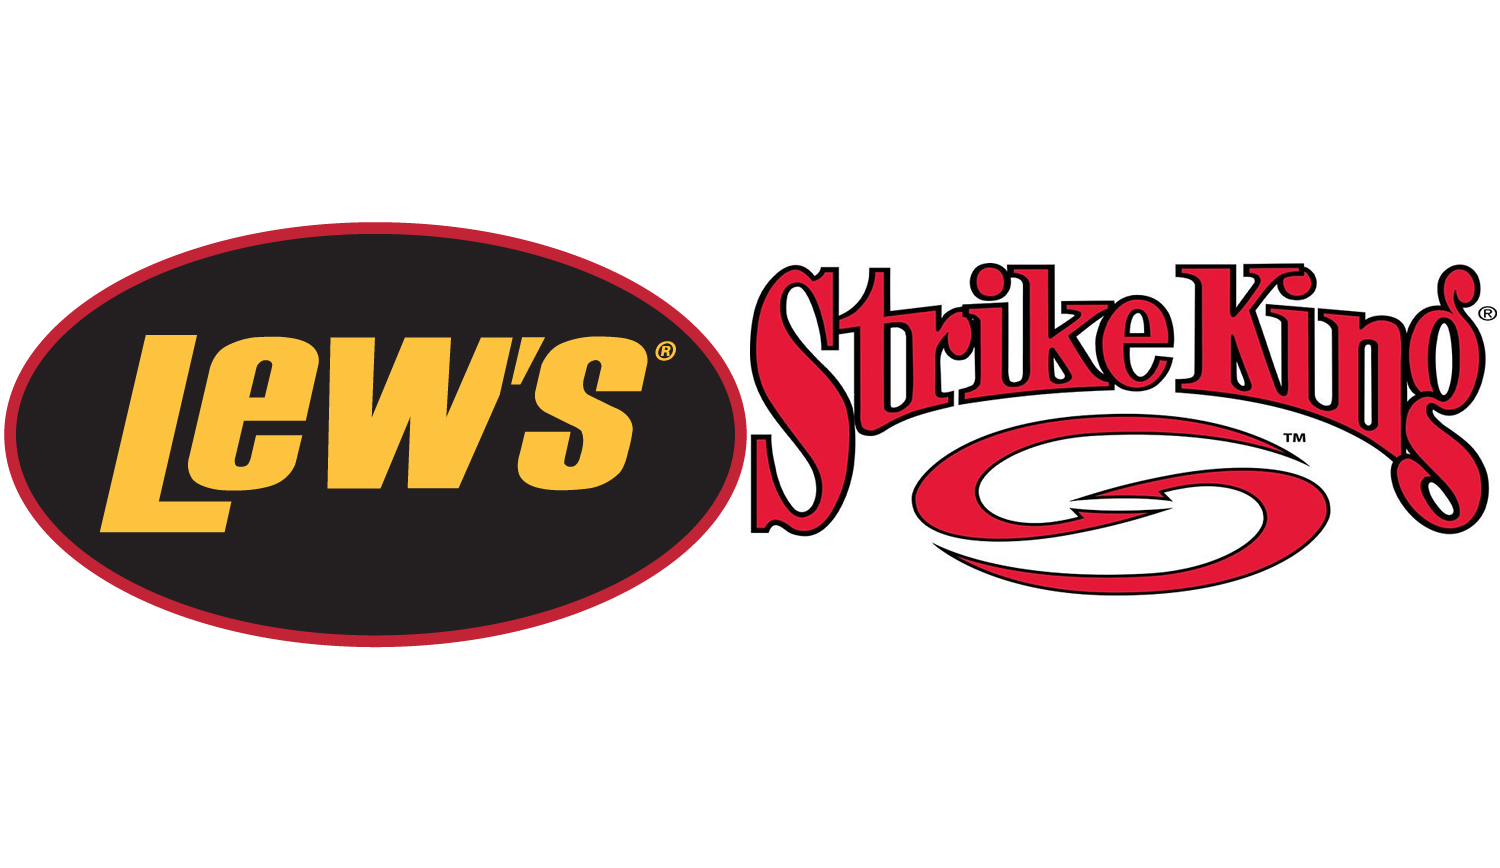 Lew's owner acquires Strike King - Bassmaster